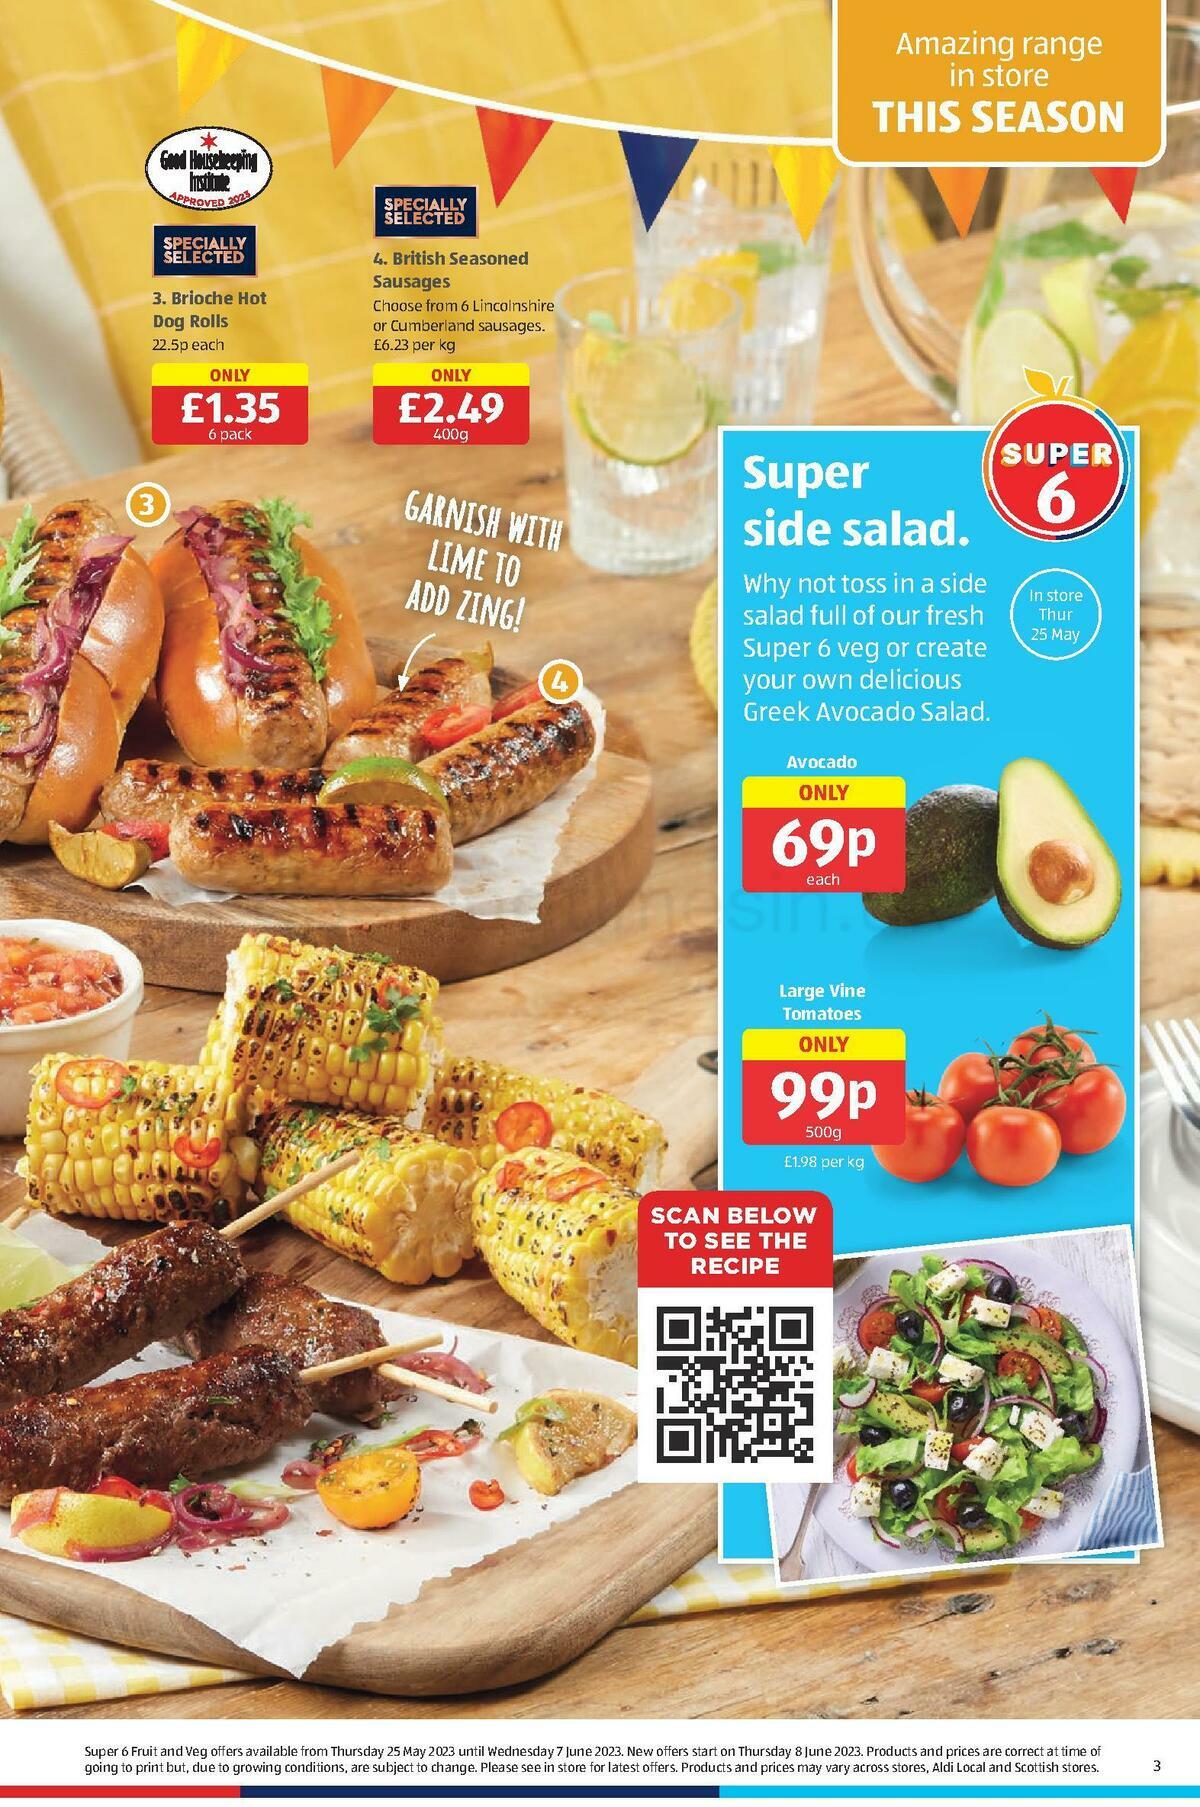 ALDI Offers from 28 May